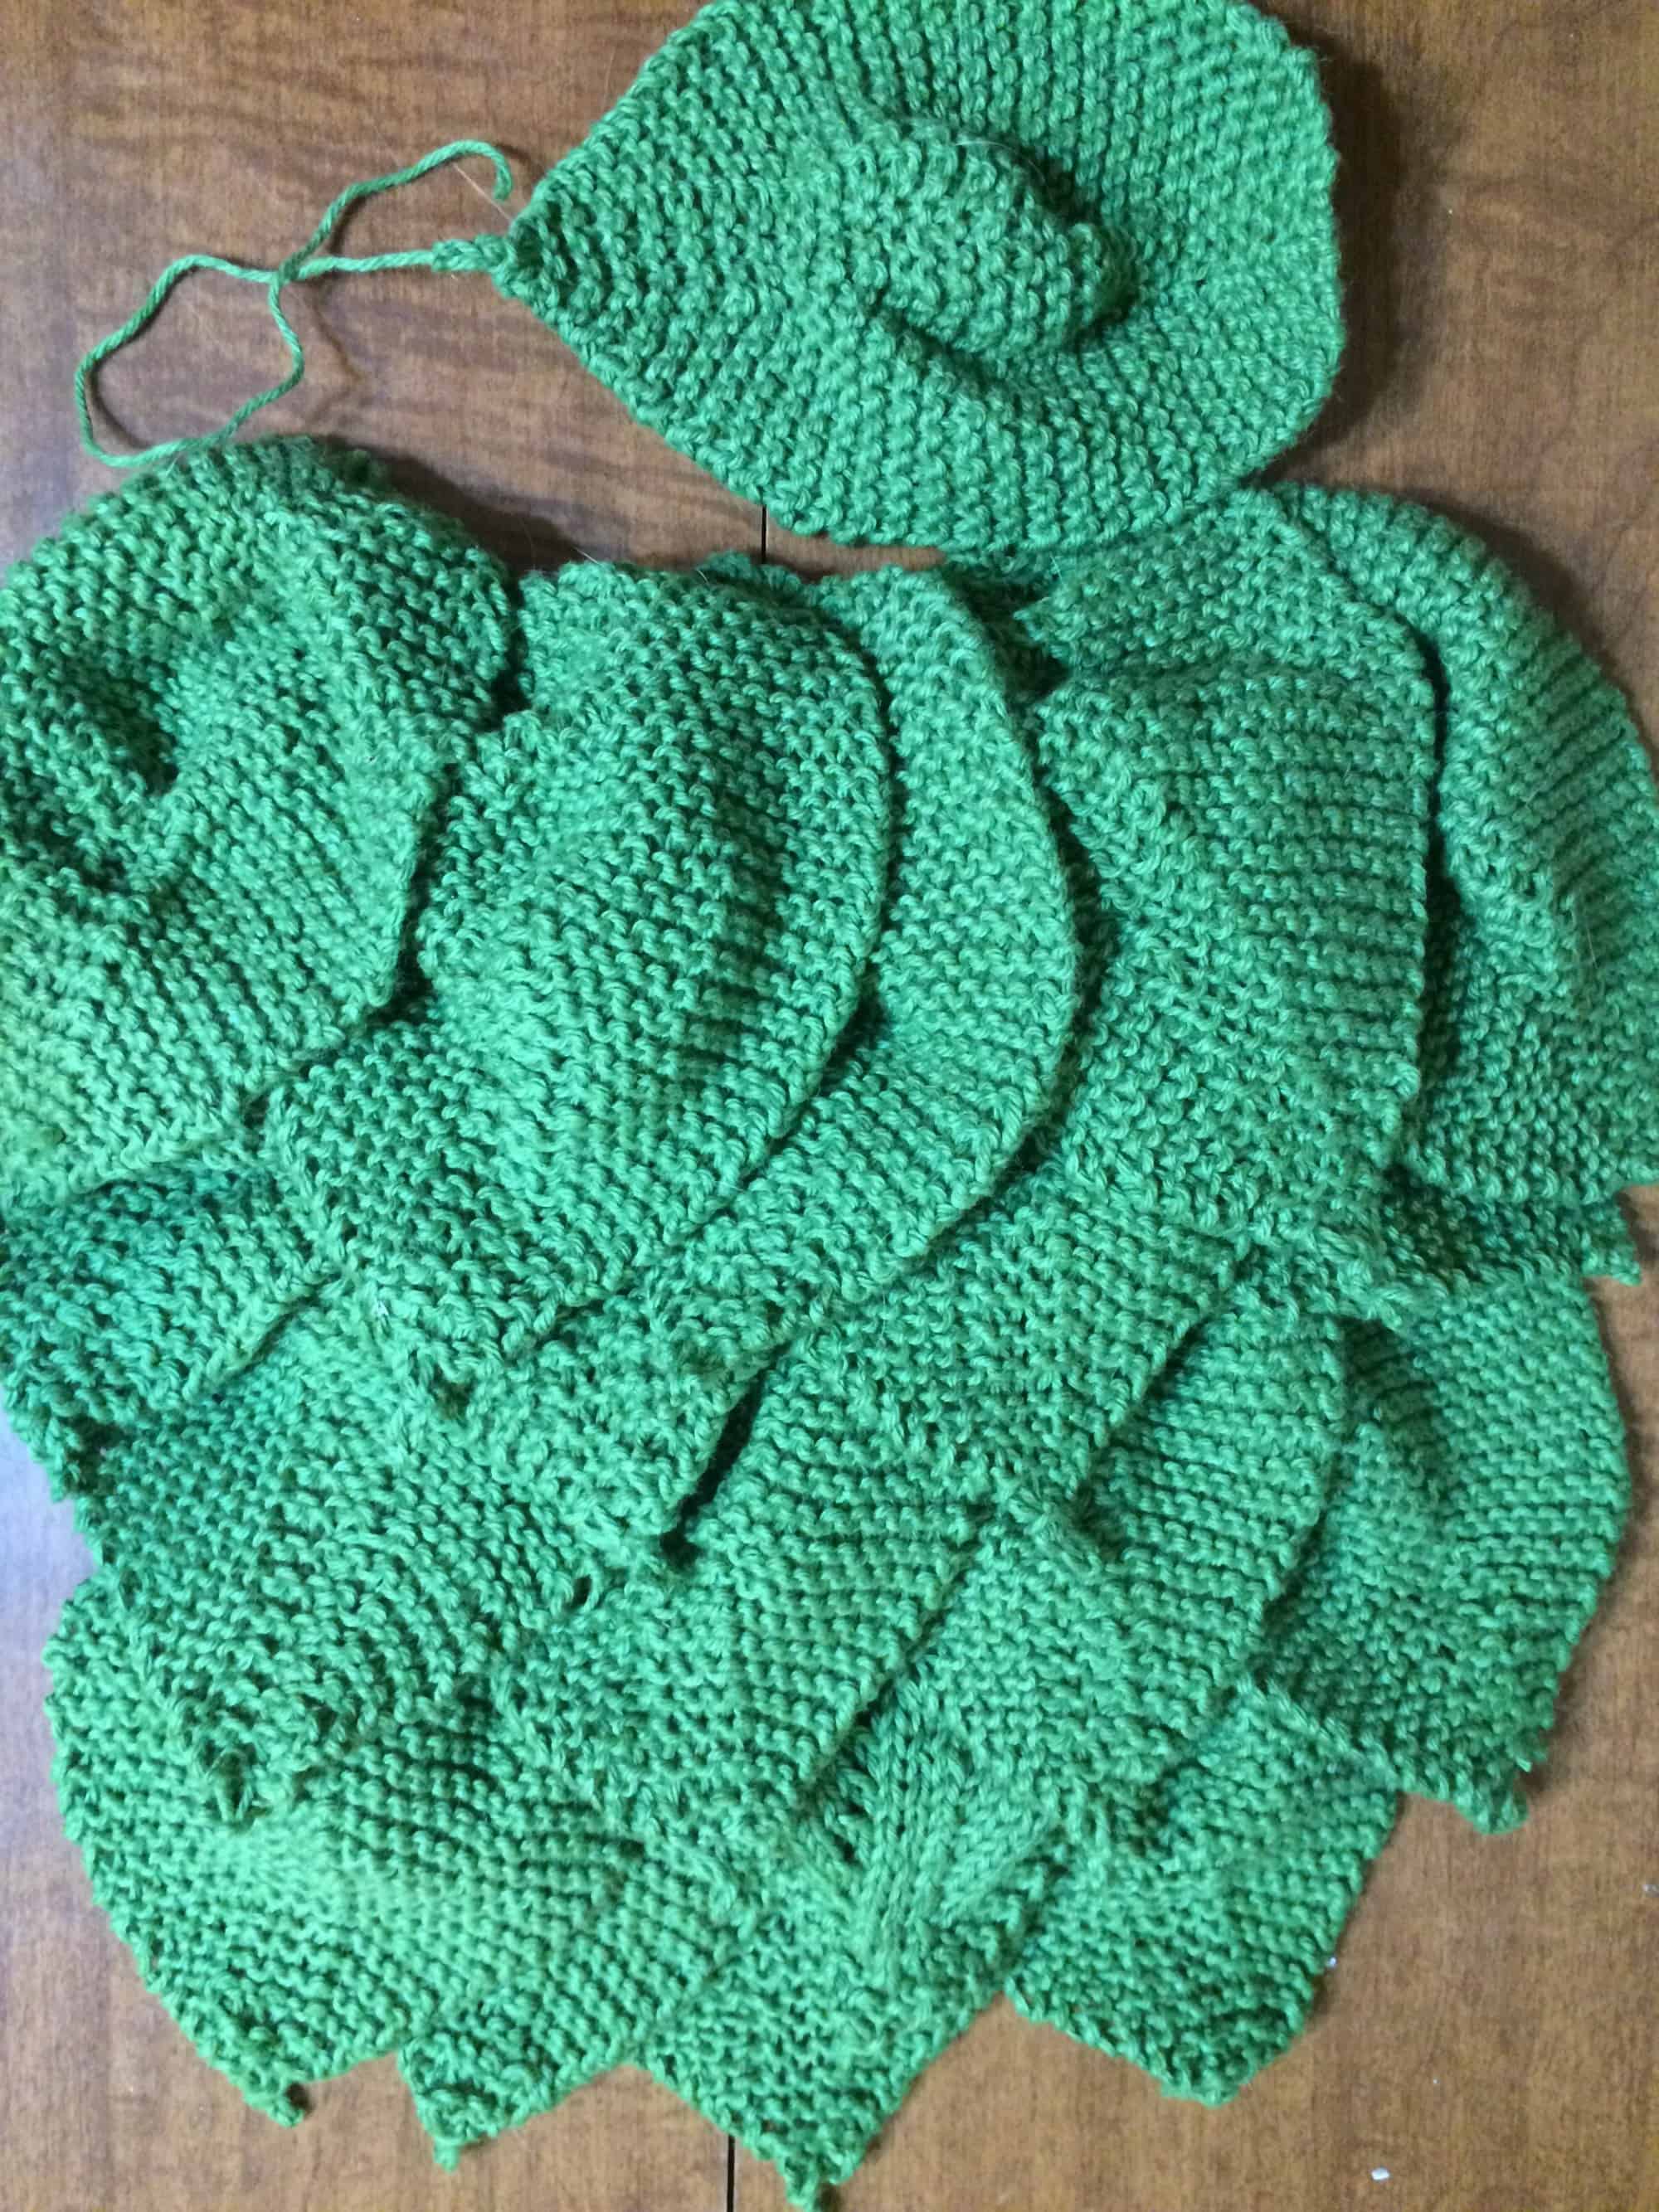 WIP Wednesday: March 25, 2015